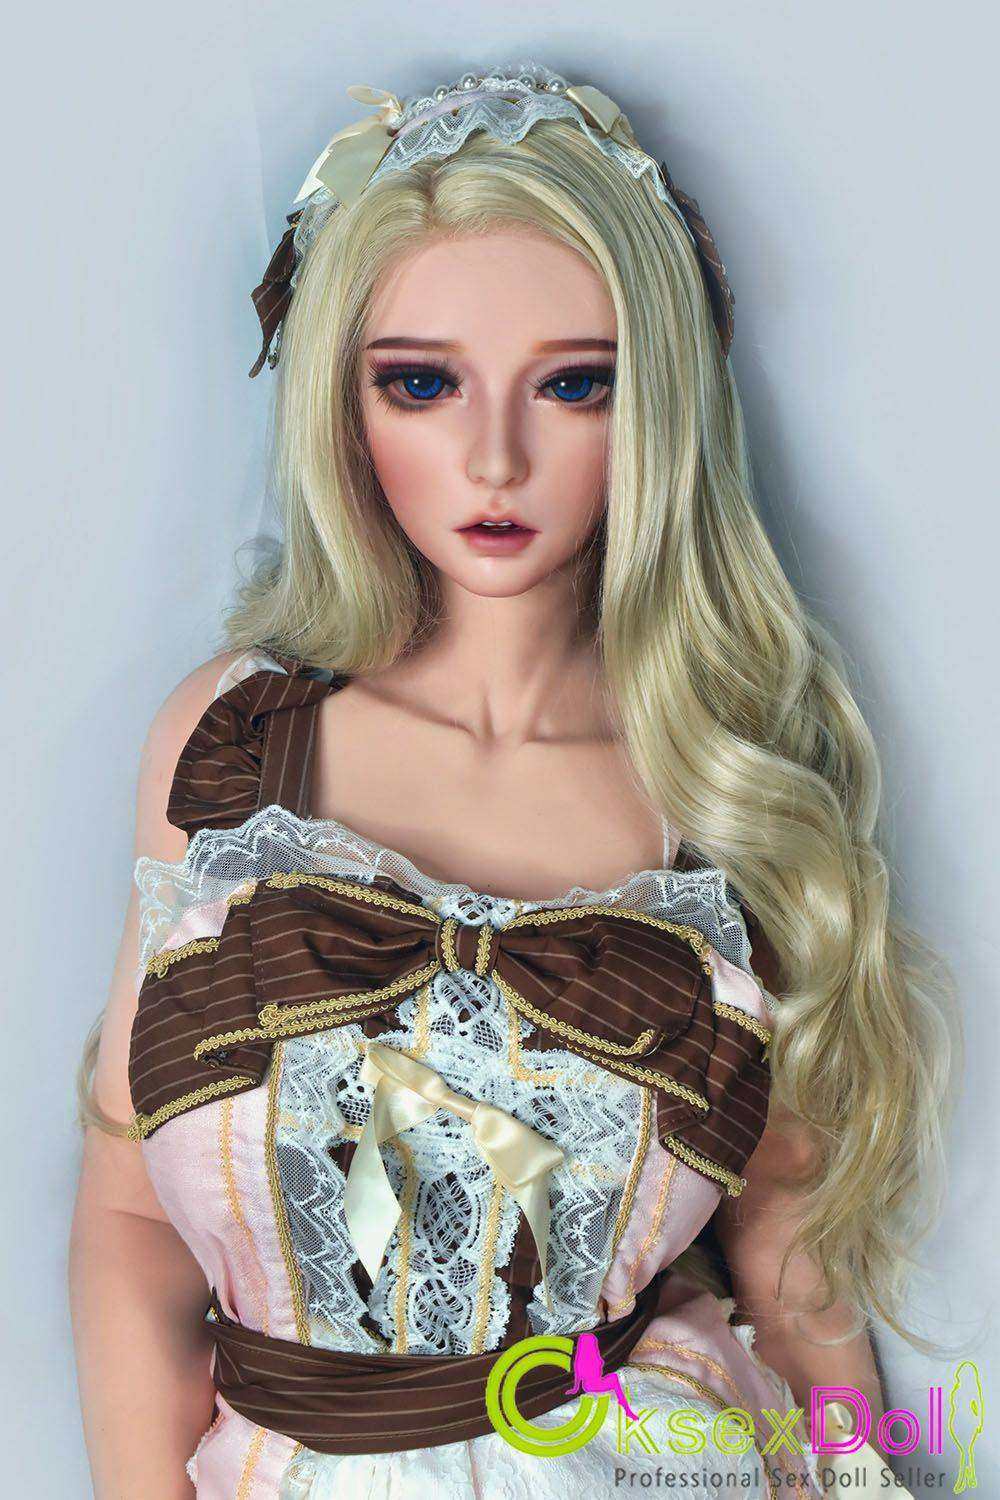 elsababe-doll.html Doll Pictures